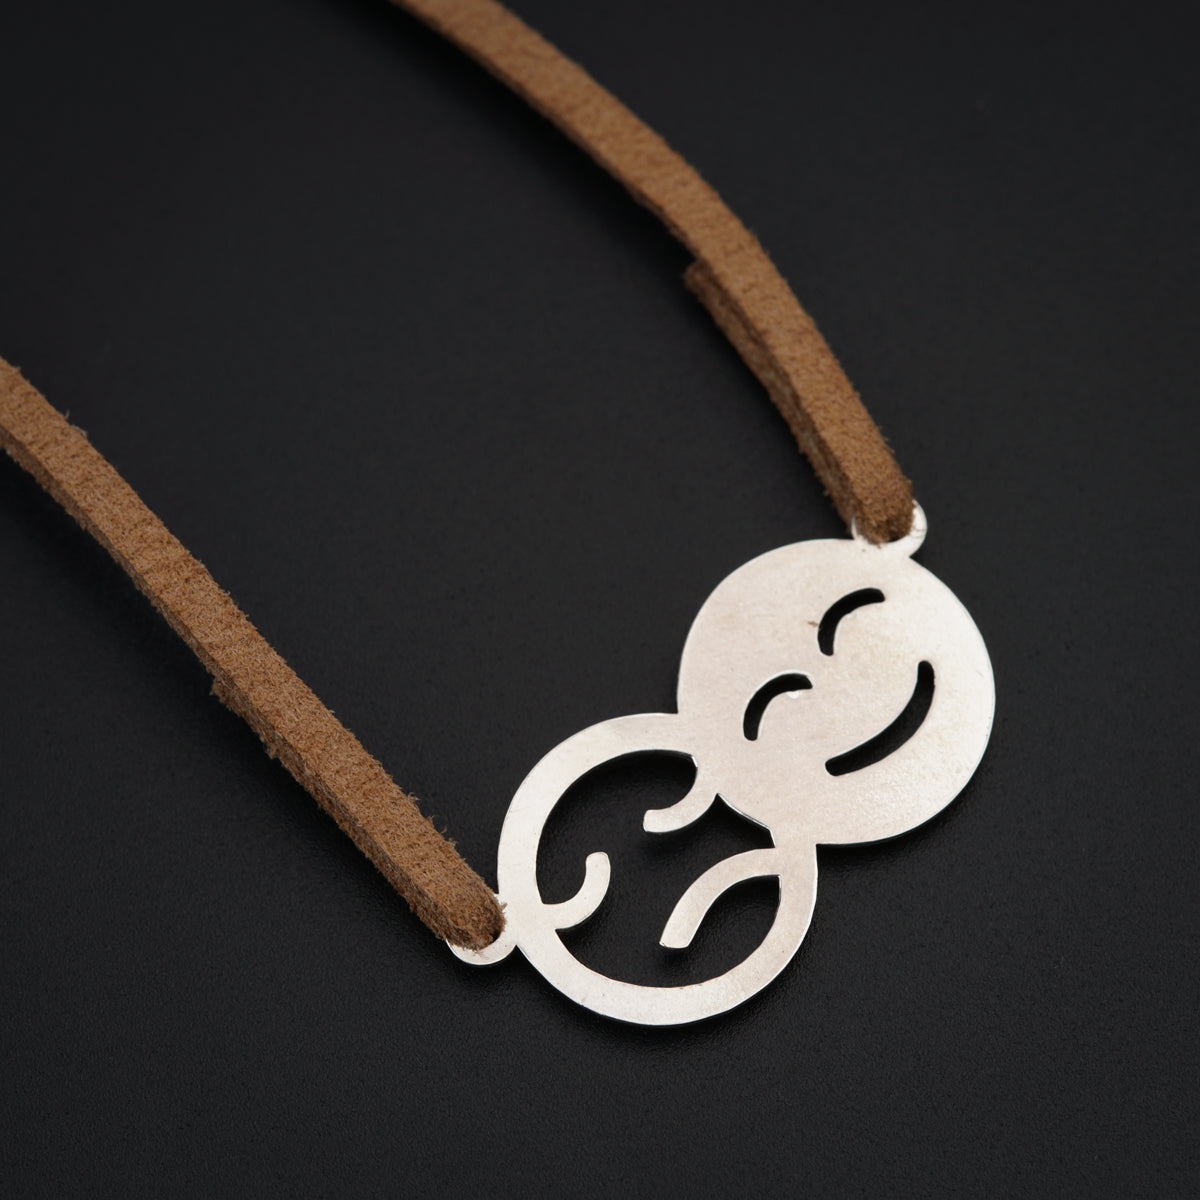 a necklace with a smiley face on a brown cord